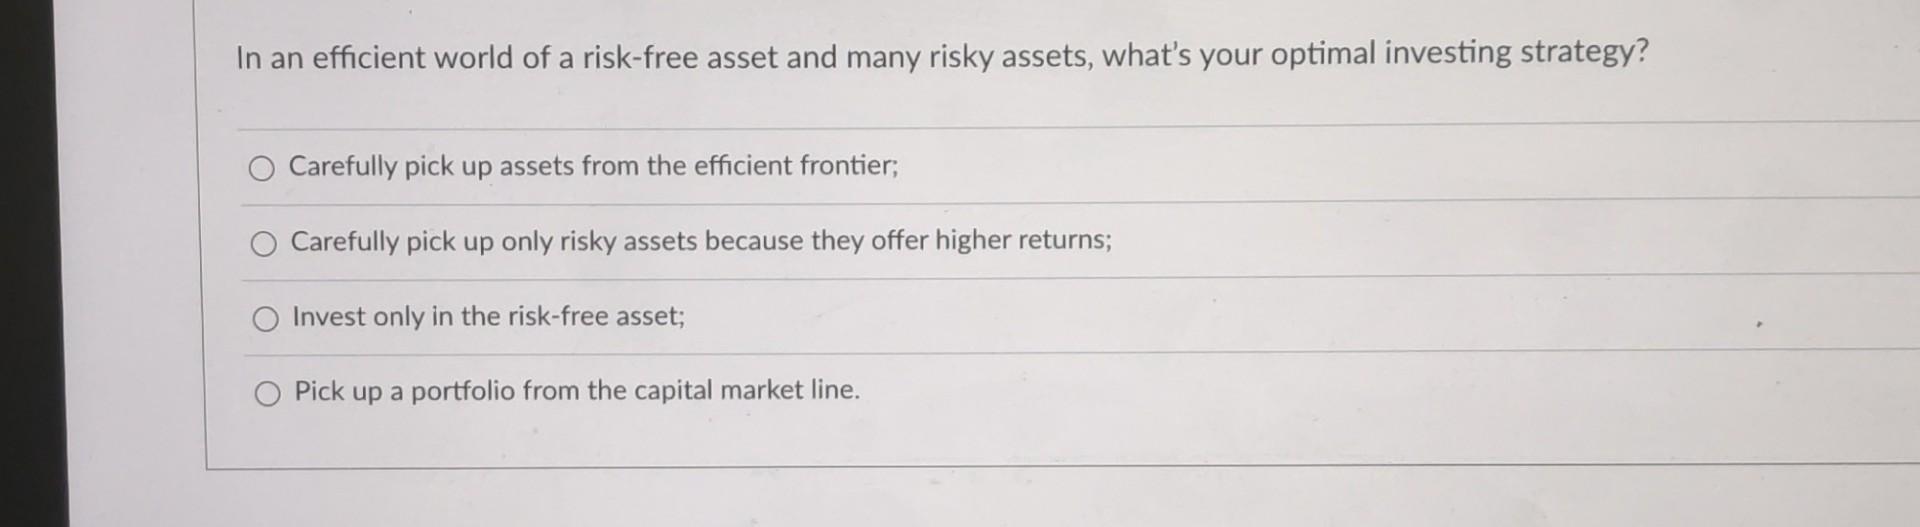 In an efficient world of a risk-free asset and many risky assets, what's your optimal investing strategy?